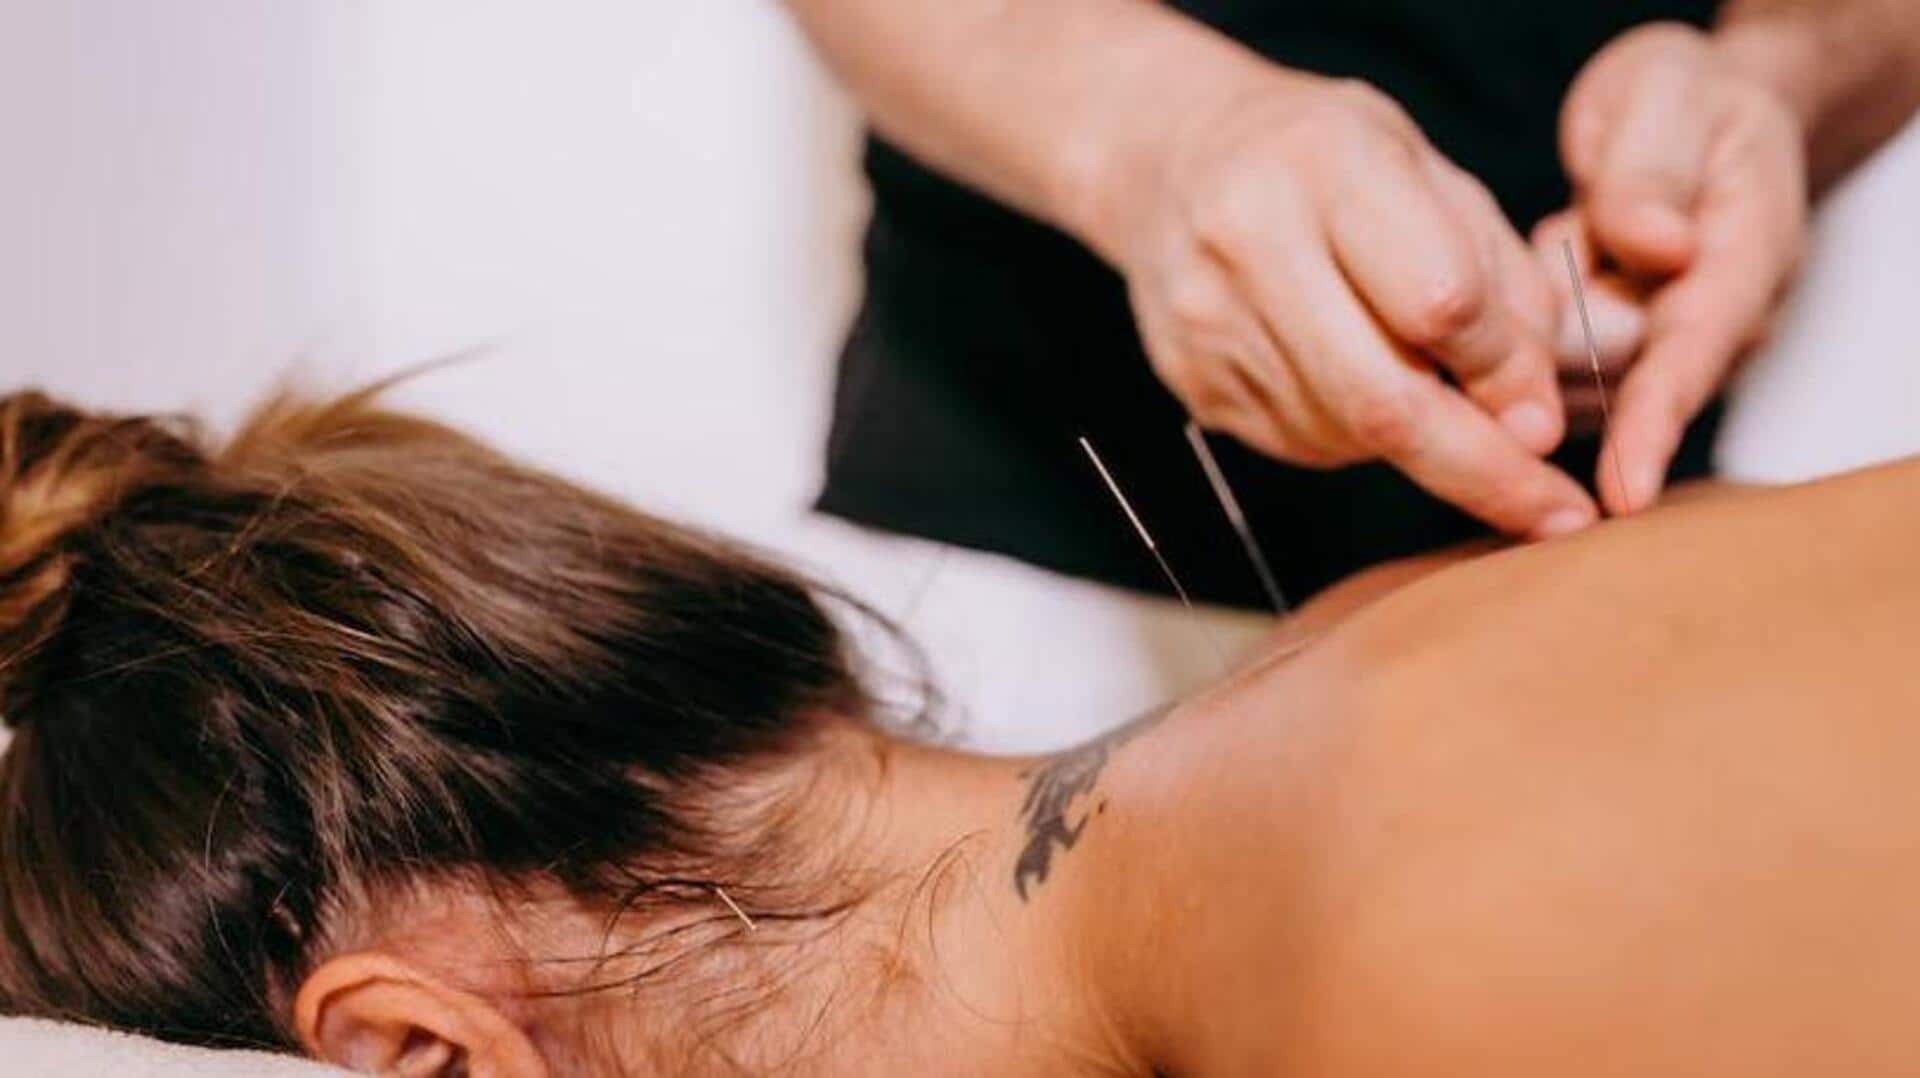 Needles of healing: Unraveling the process of acupuncture